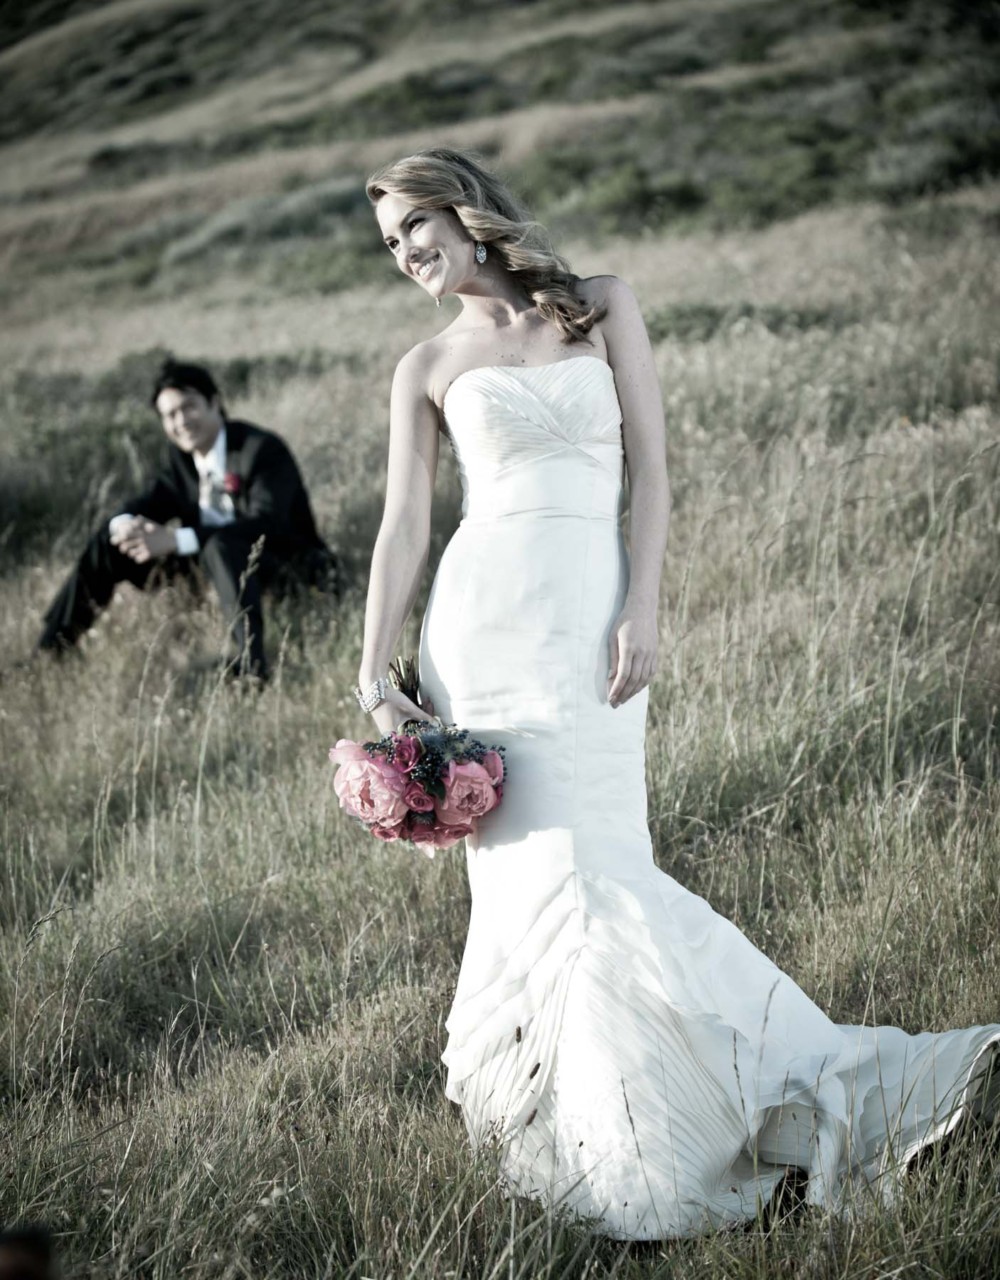 Looking for a fall wedding photographer in Eagle River?